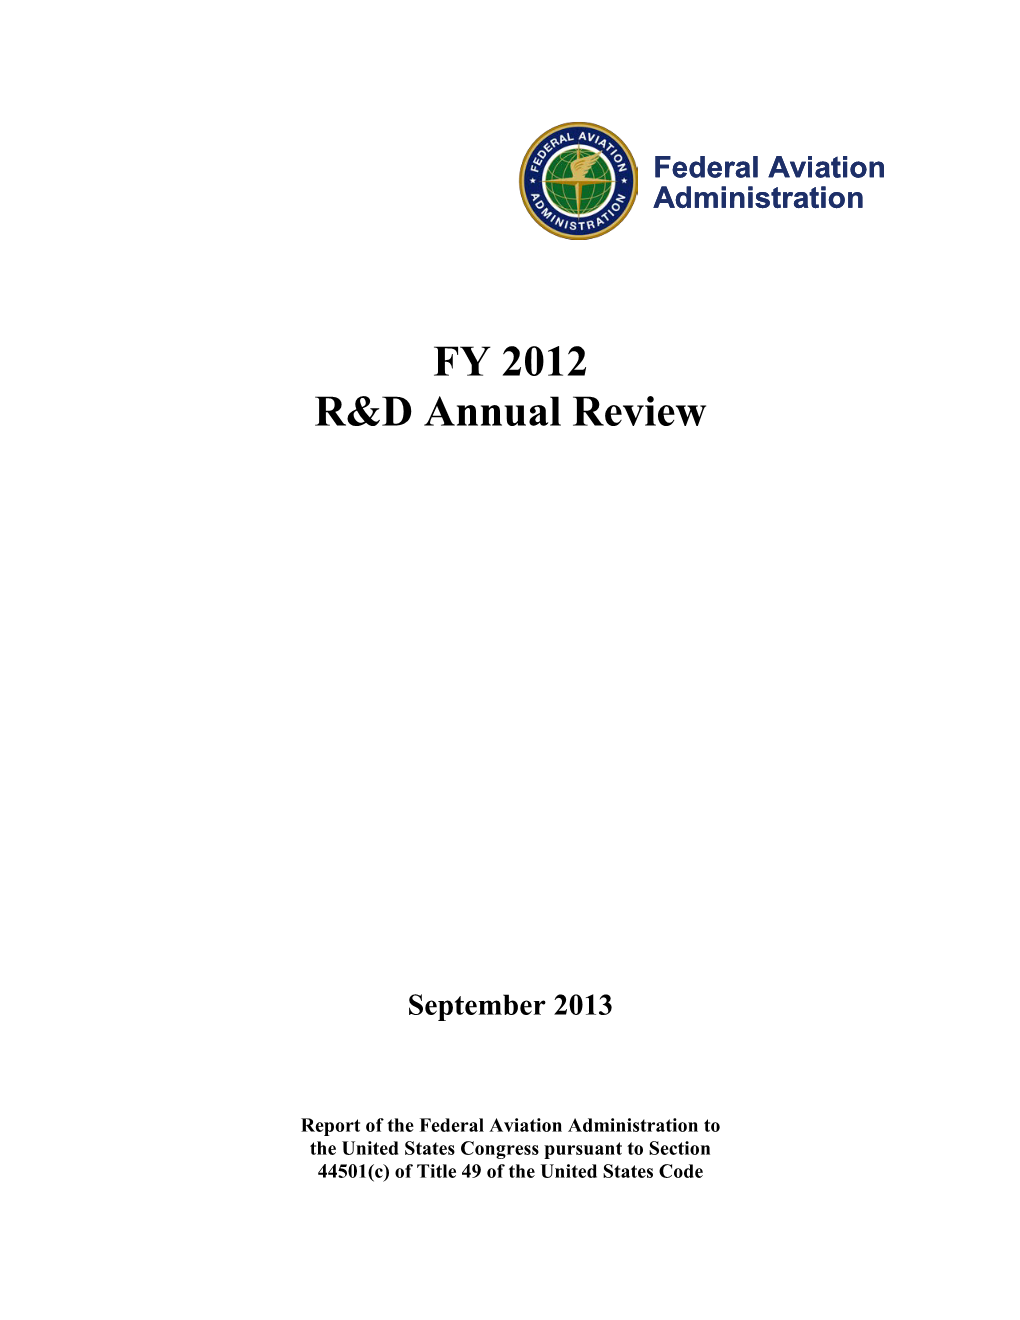 FY 2012 Annual Review